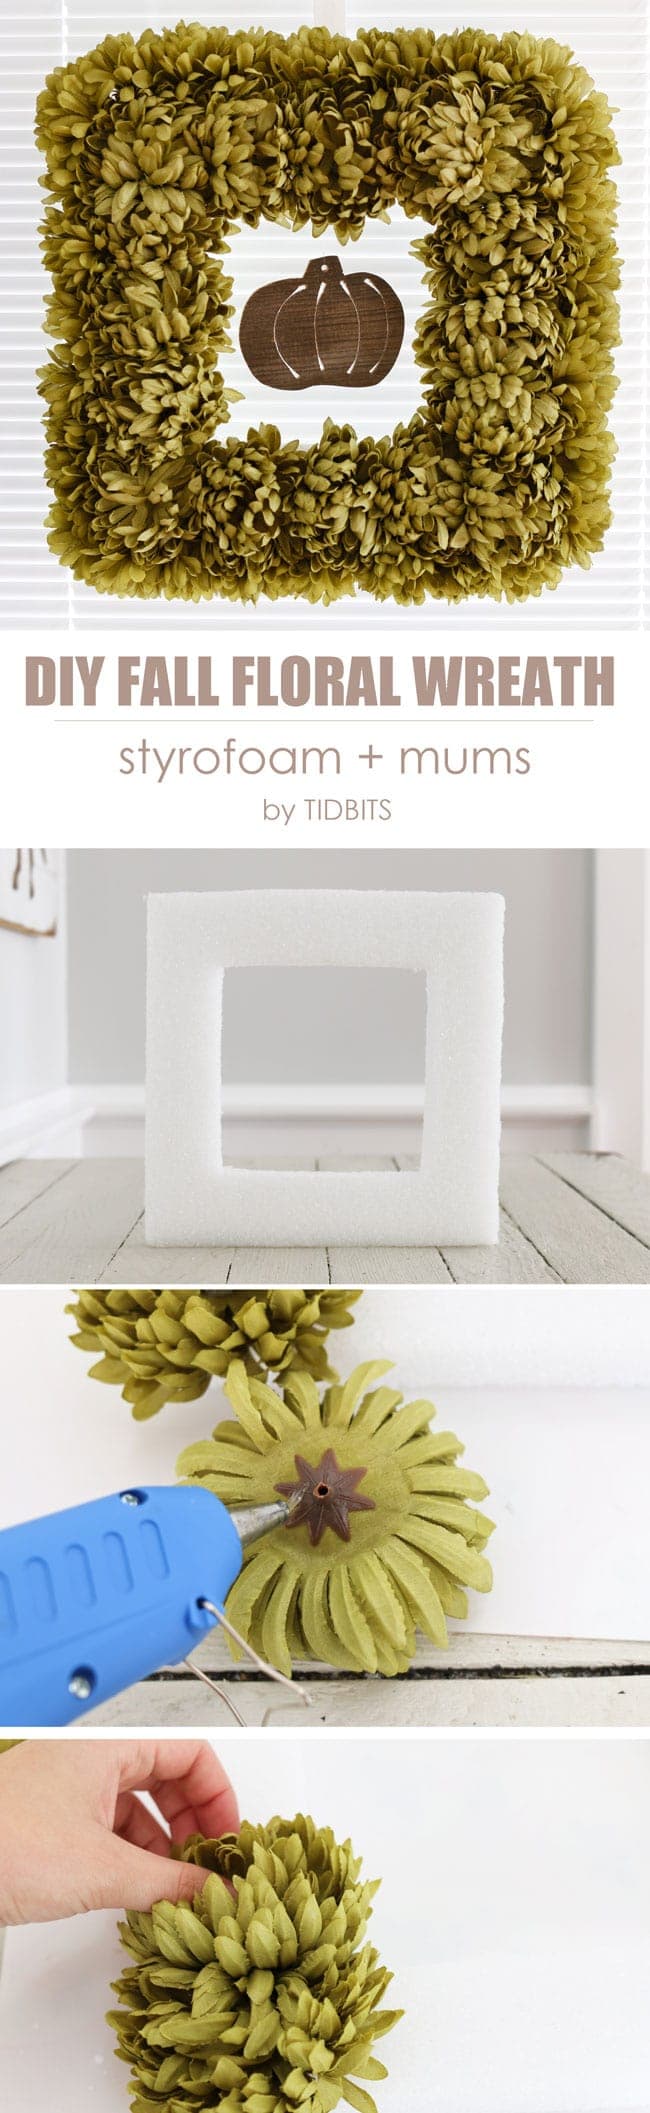 Easy DIY Fall floral wreath made from sytrofoam and artificial mums.